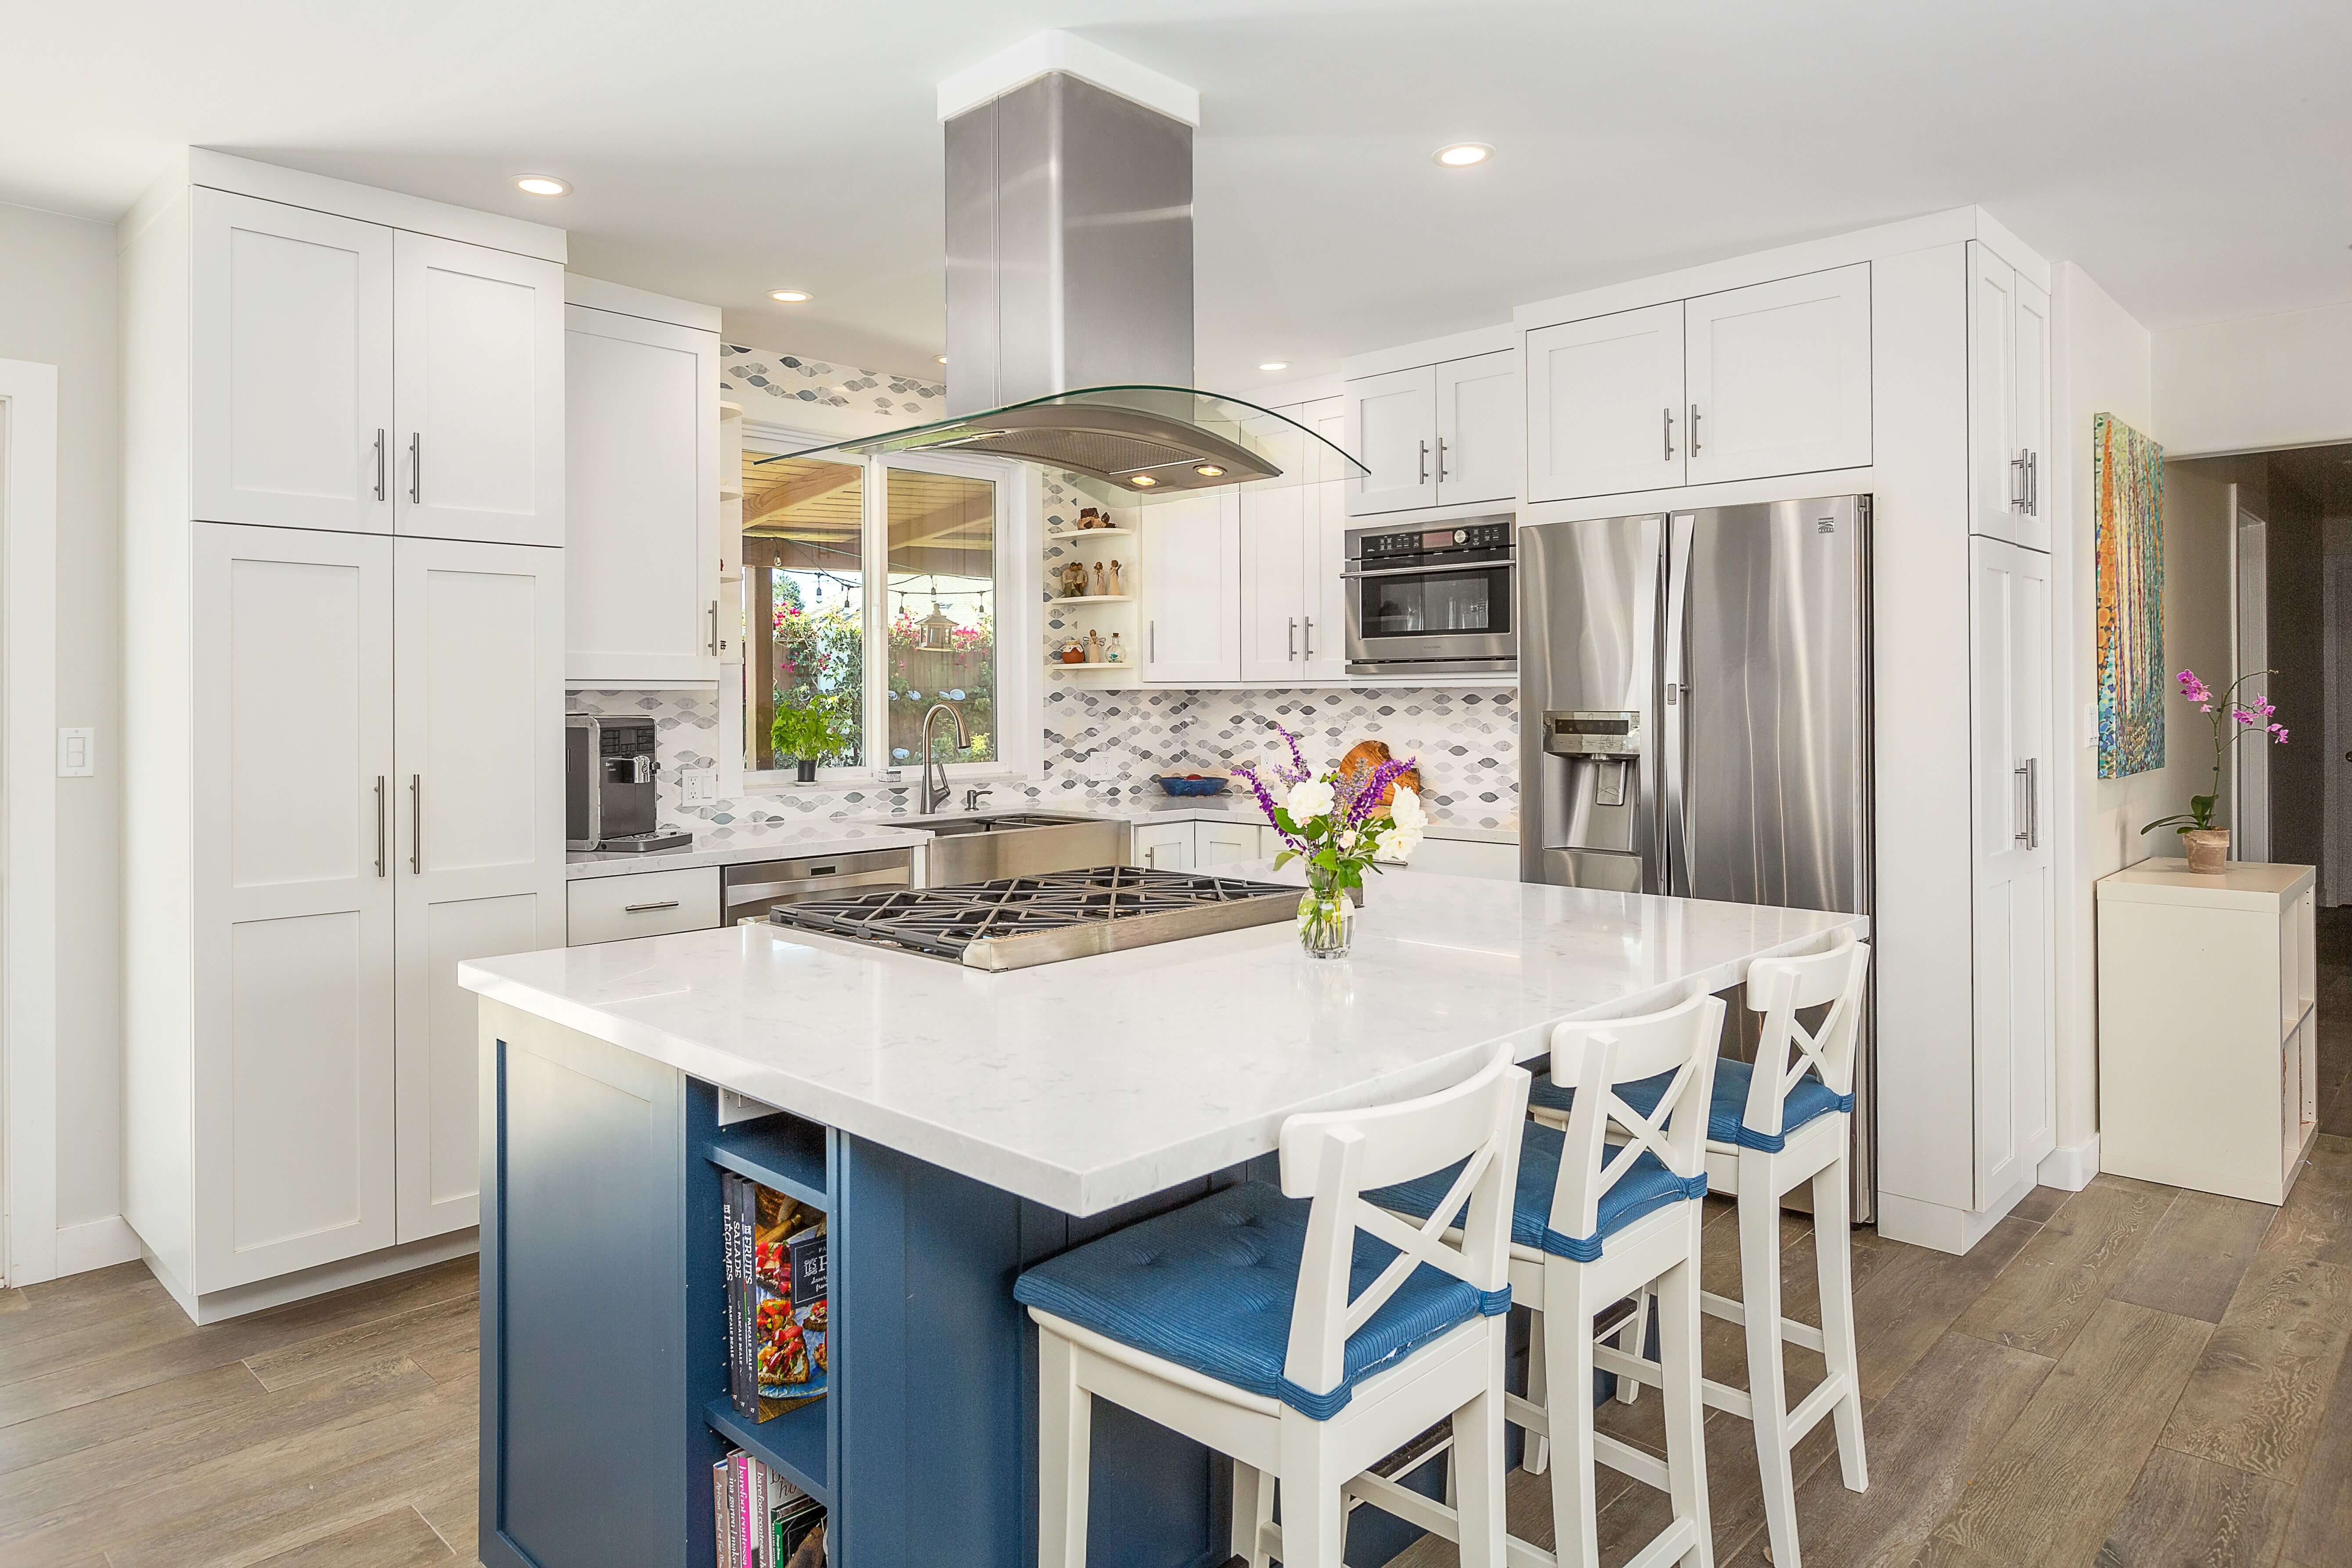 A white and blue kitchen design with a navy blue kitchen island.